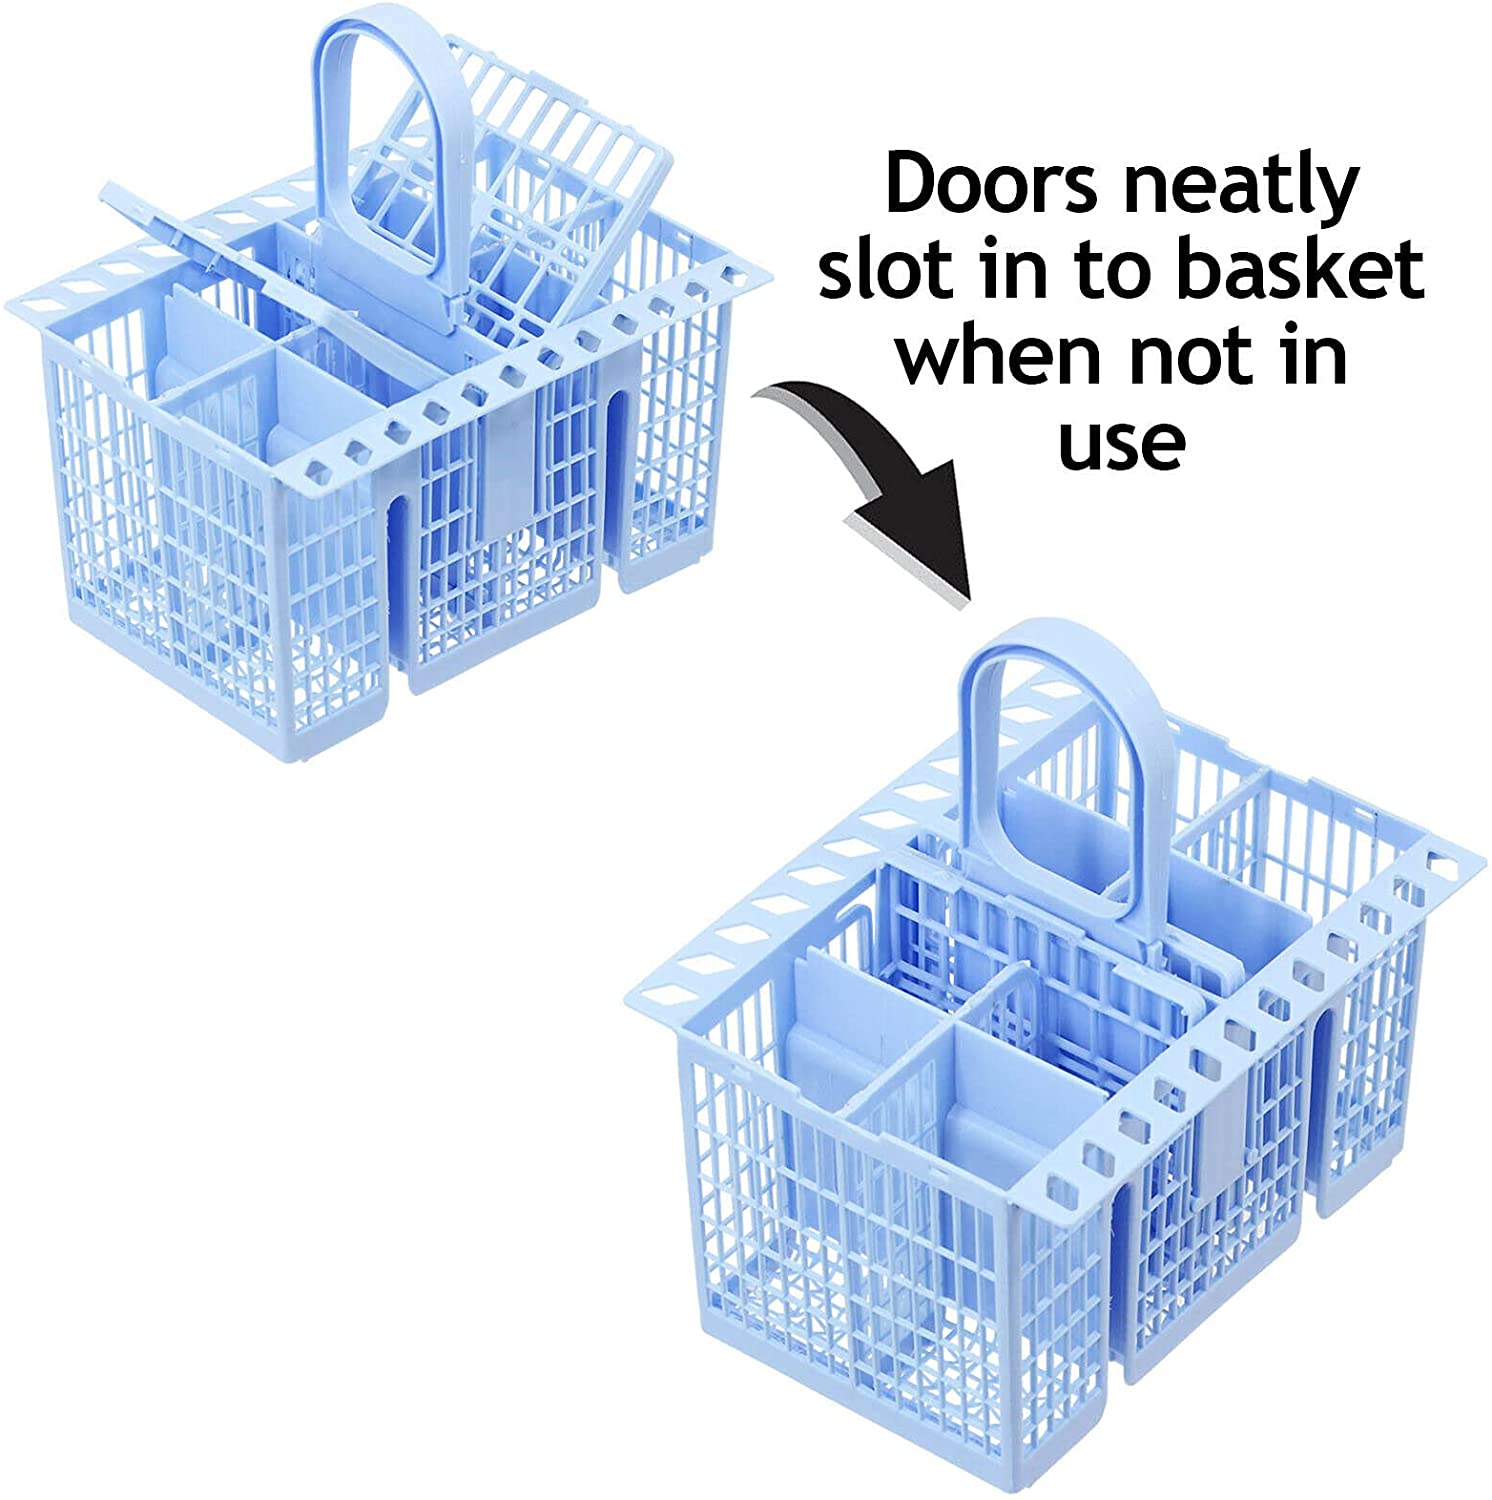 SPARES2GO Cutlery Basket compatible with Brandt Dishwasher (Blue, 220 x 208 x 160mm)